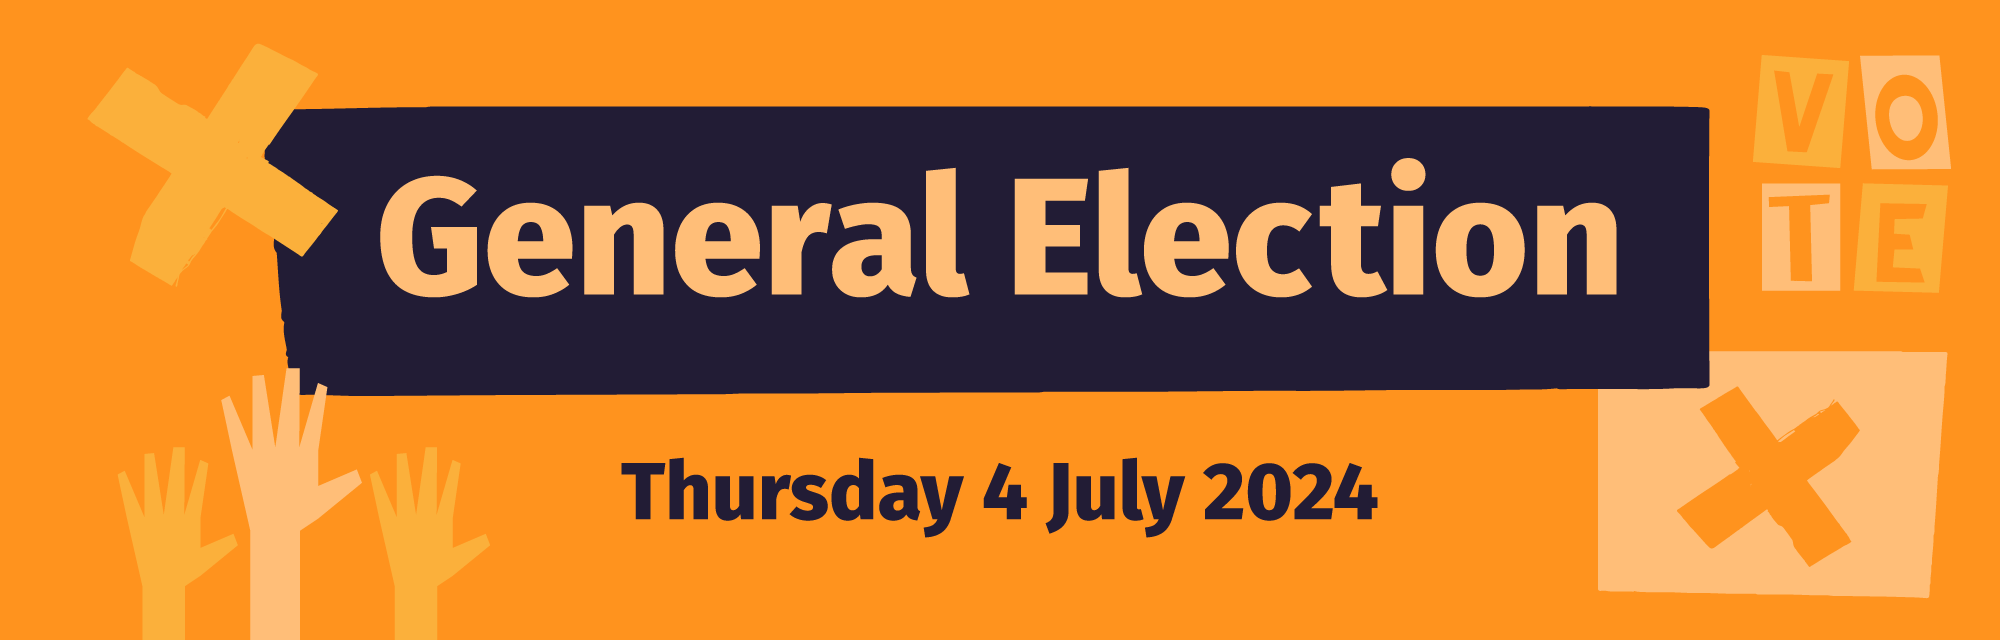 Yellow background with the words General Election Thursday 4 July 2024